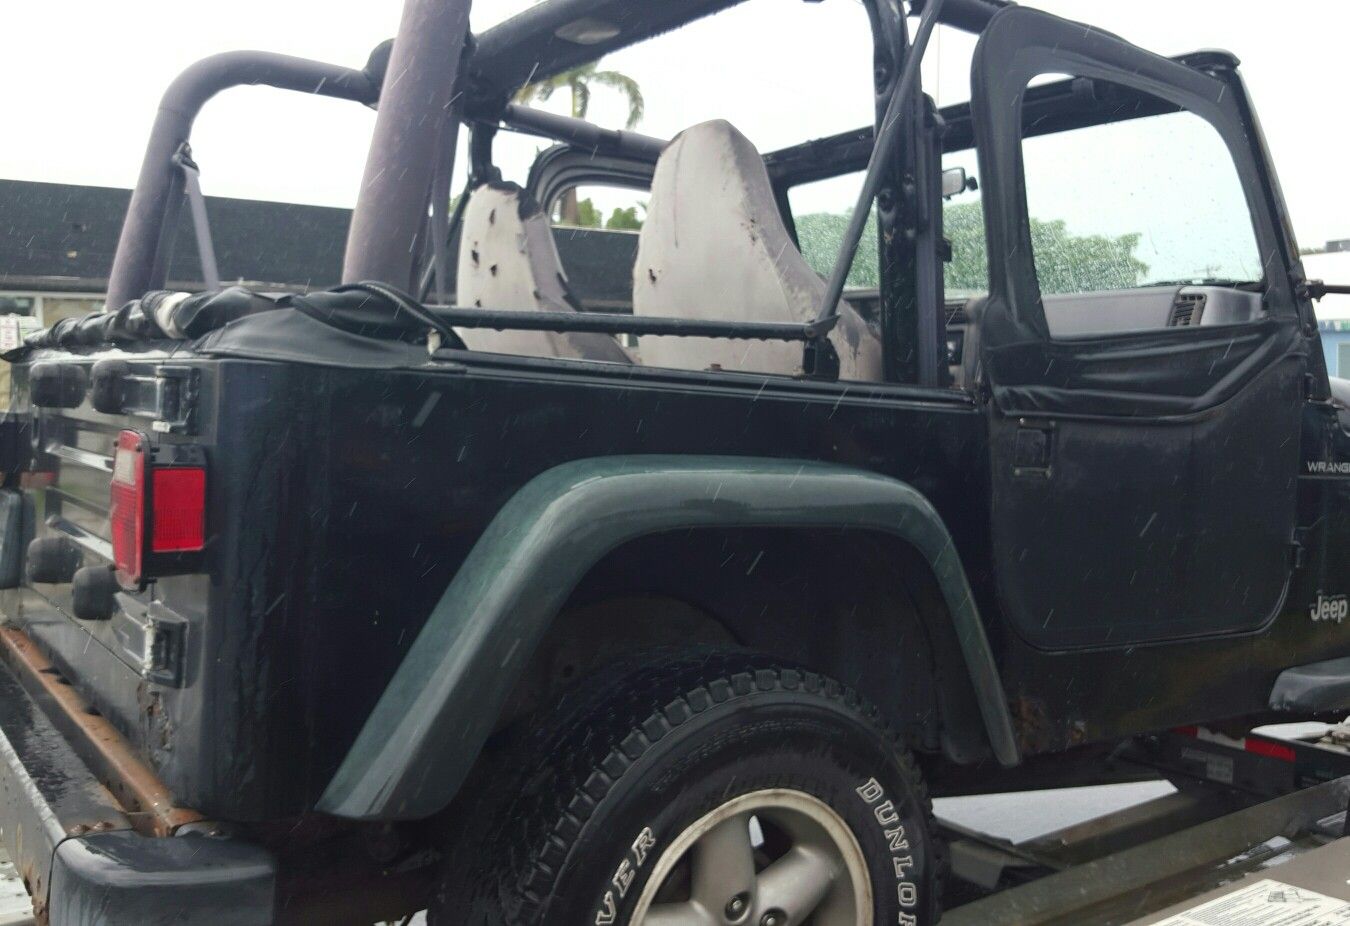 jeep wrangler parts from jeep fit 97 up years also more parts available tj 96 -06